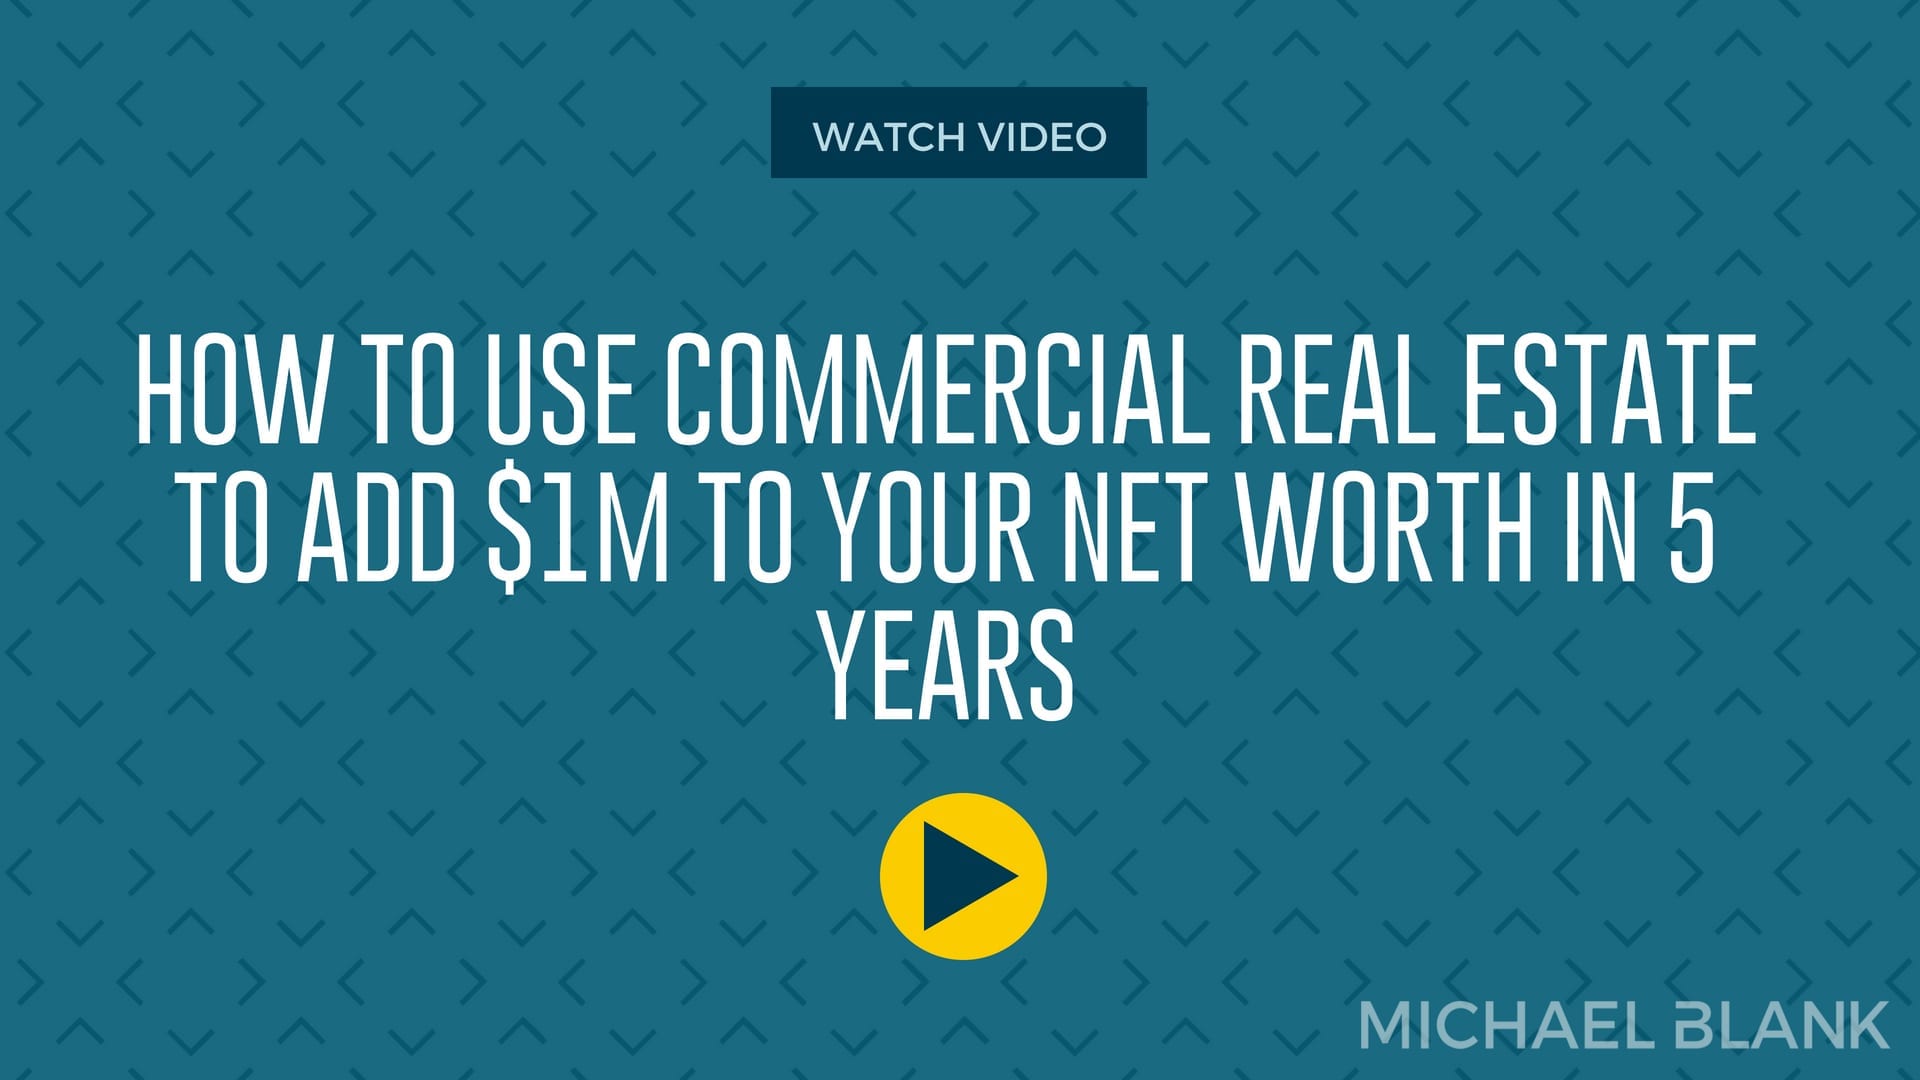 How to Use Commercial Real Estate to Add $1M to Your Net Worth in 5 Years